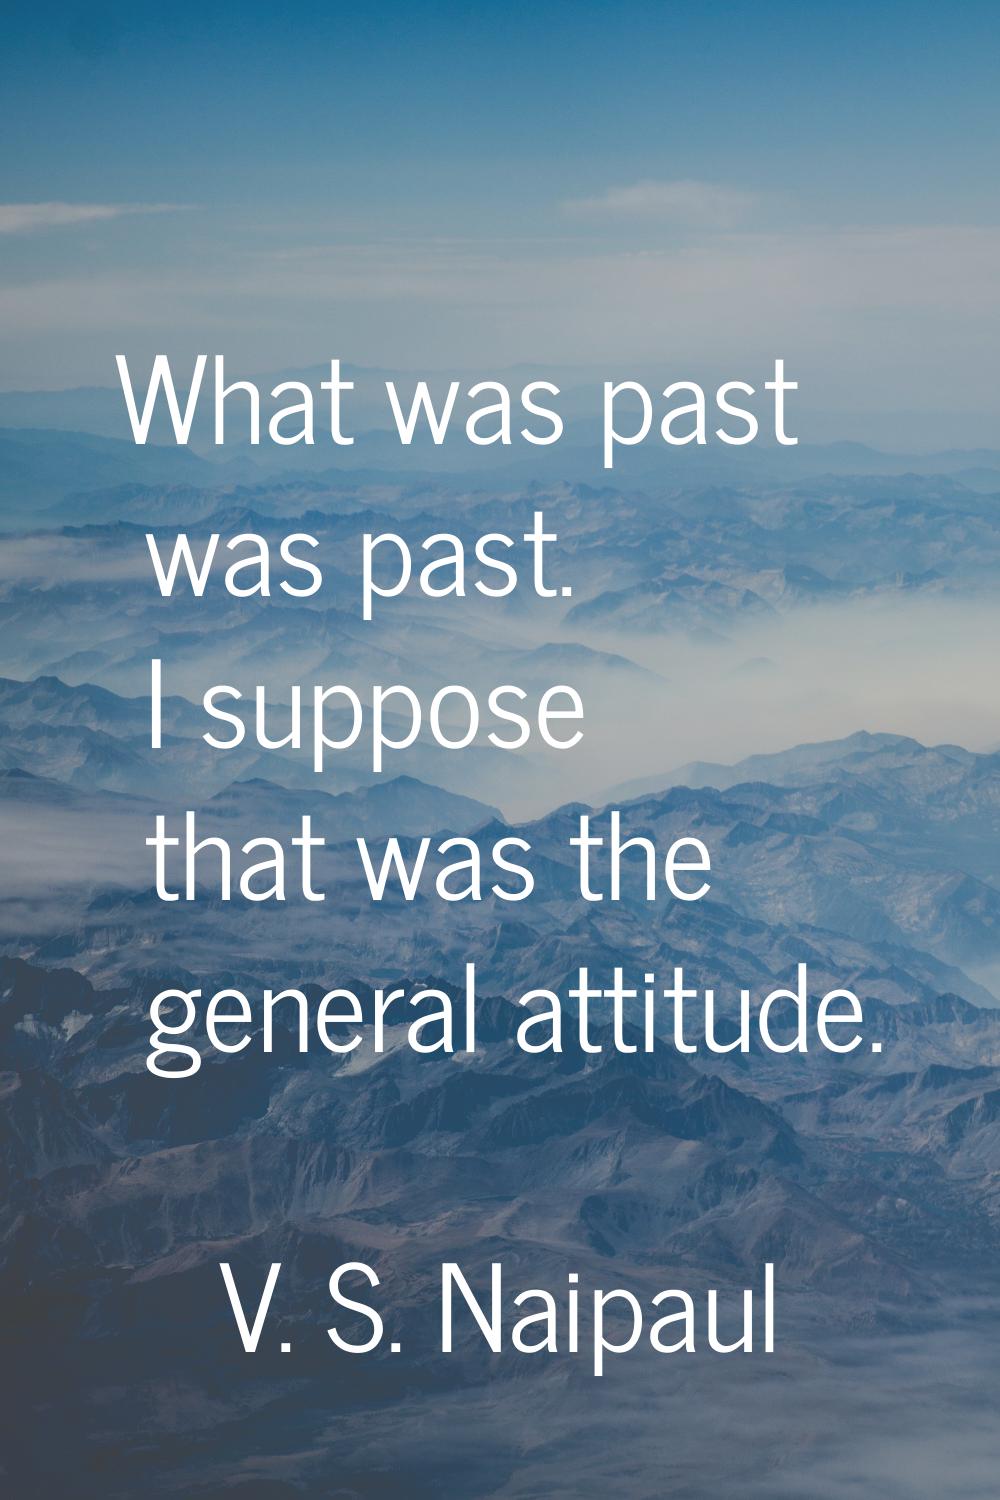 What was past was past. I suppose that was the general attitude.